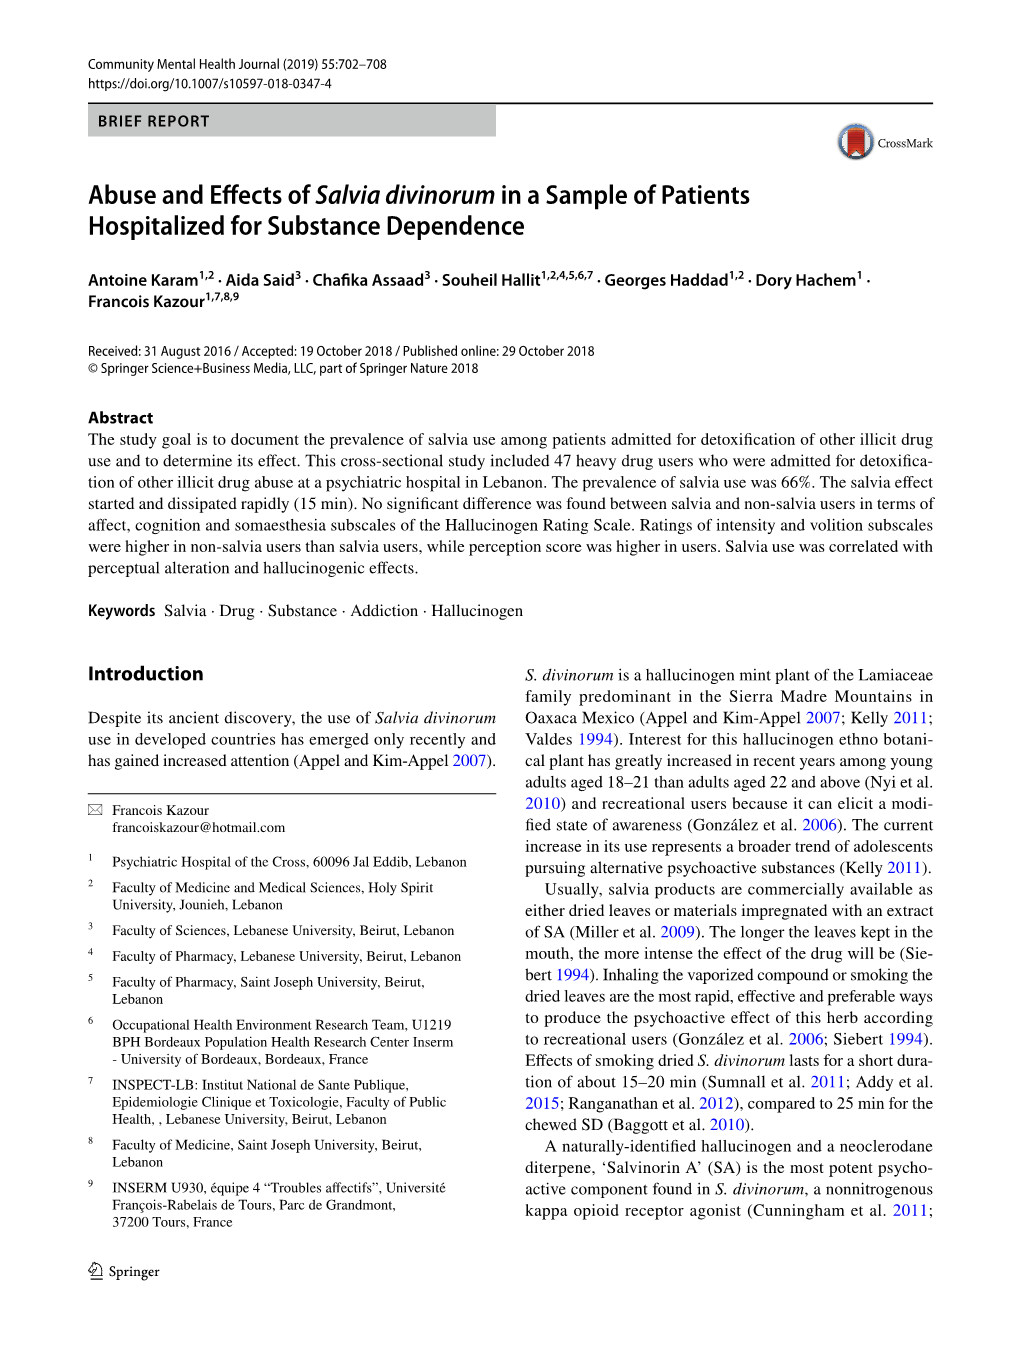 Abuse and Effects of Salvia Divinorum in a Sample of Patients Hospitalized for Substance Dependence